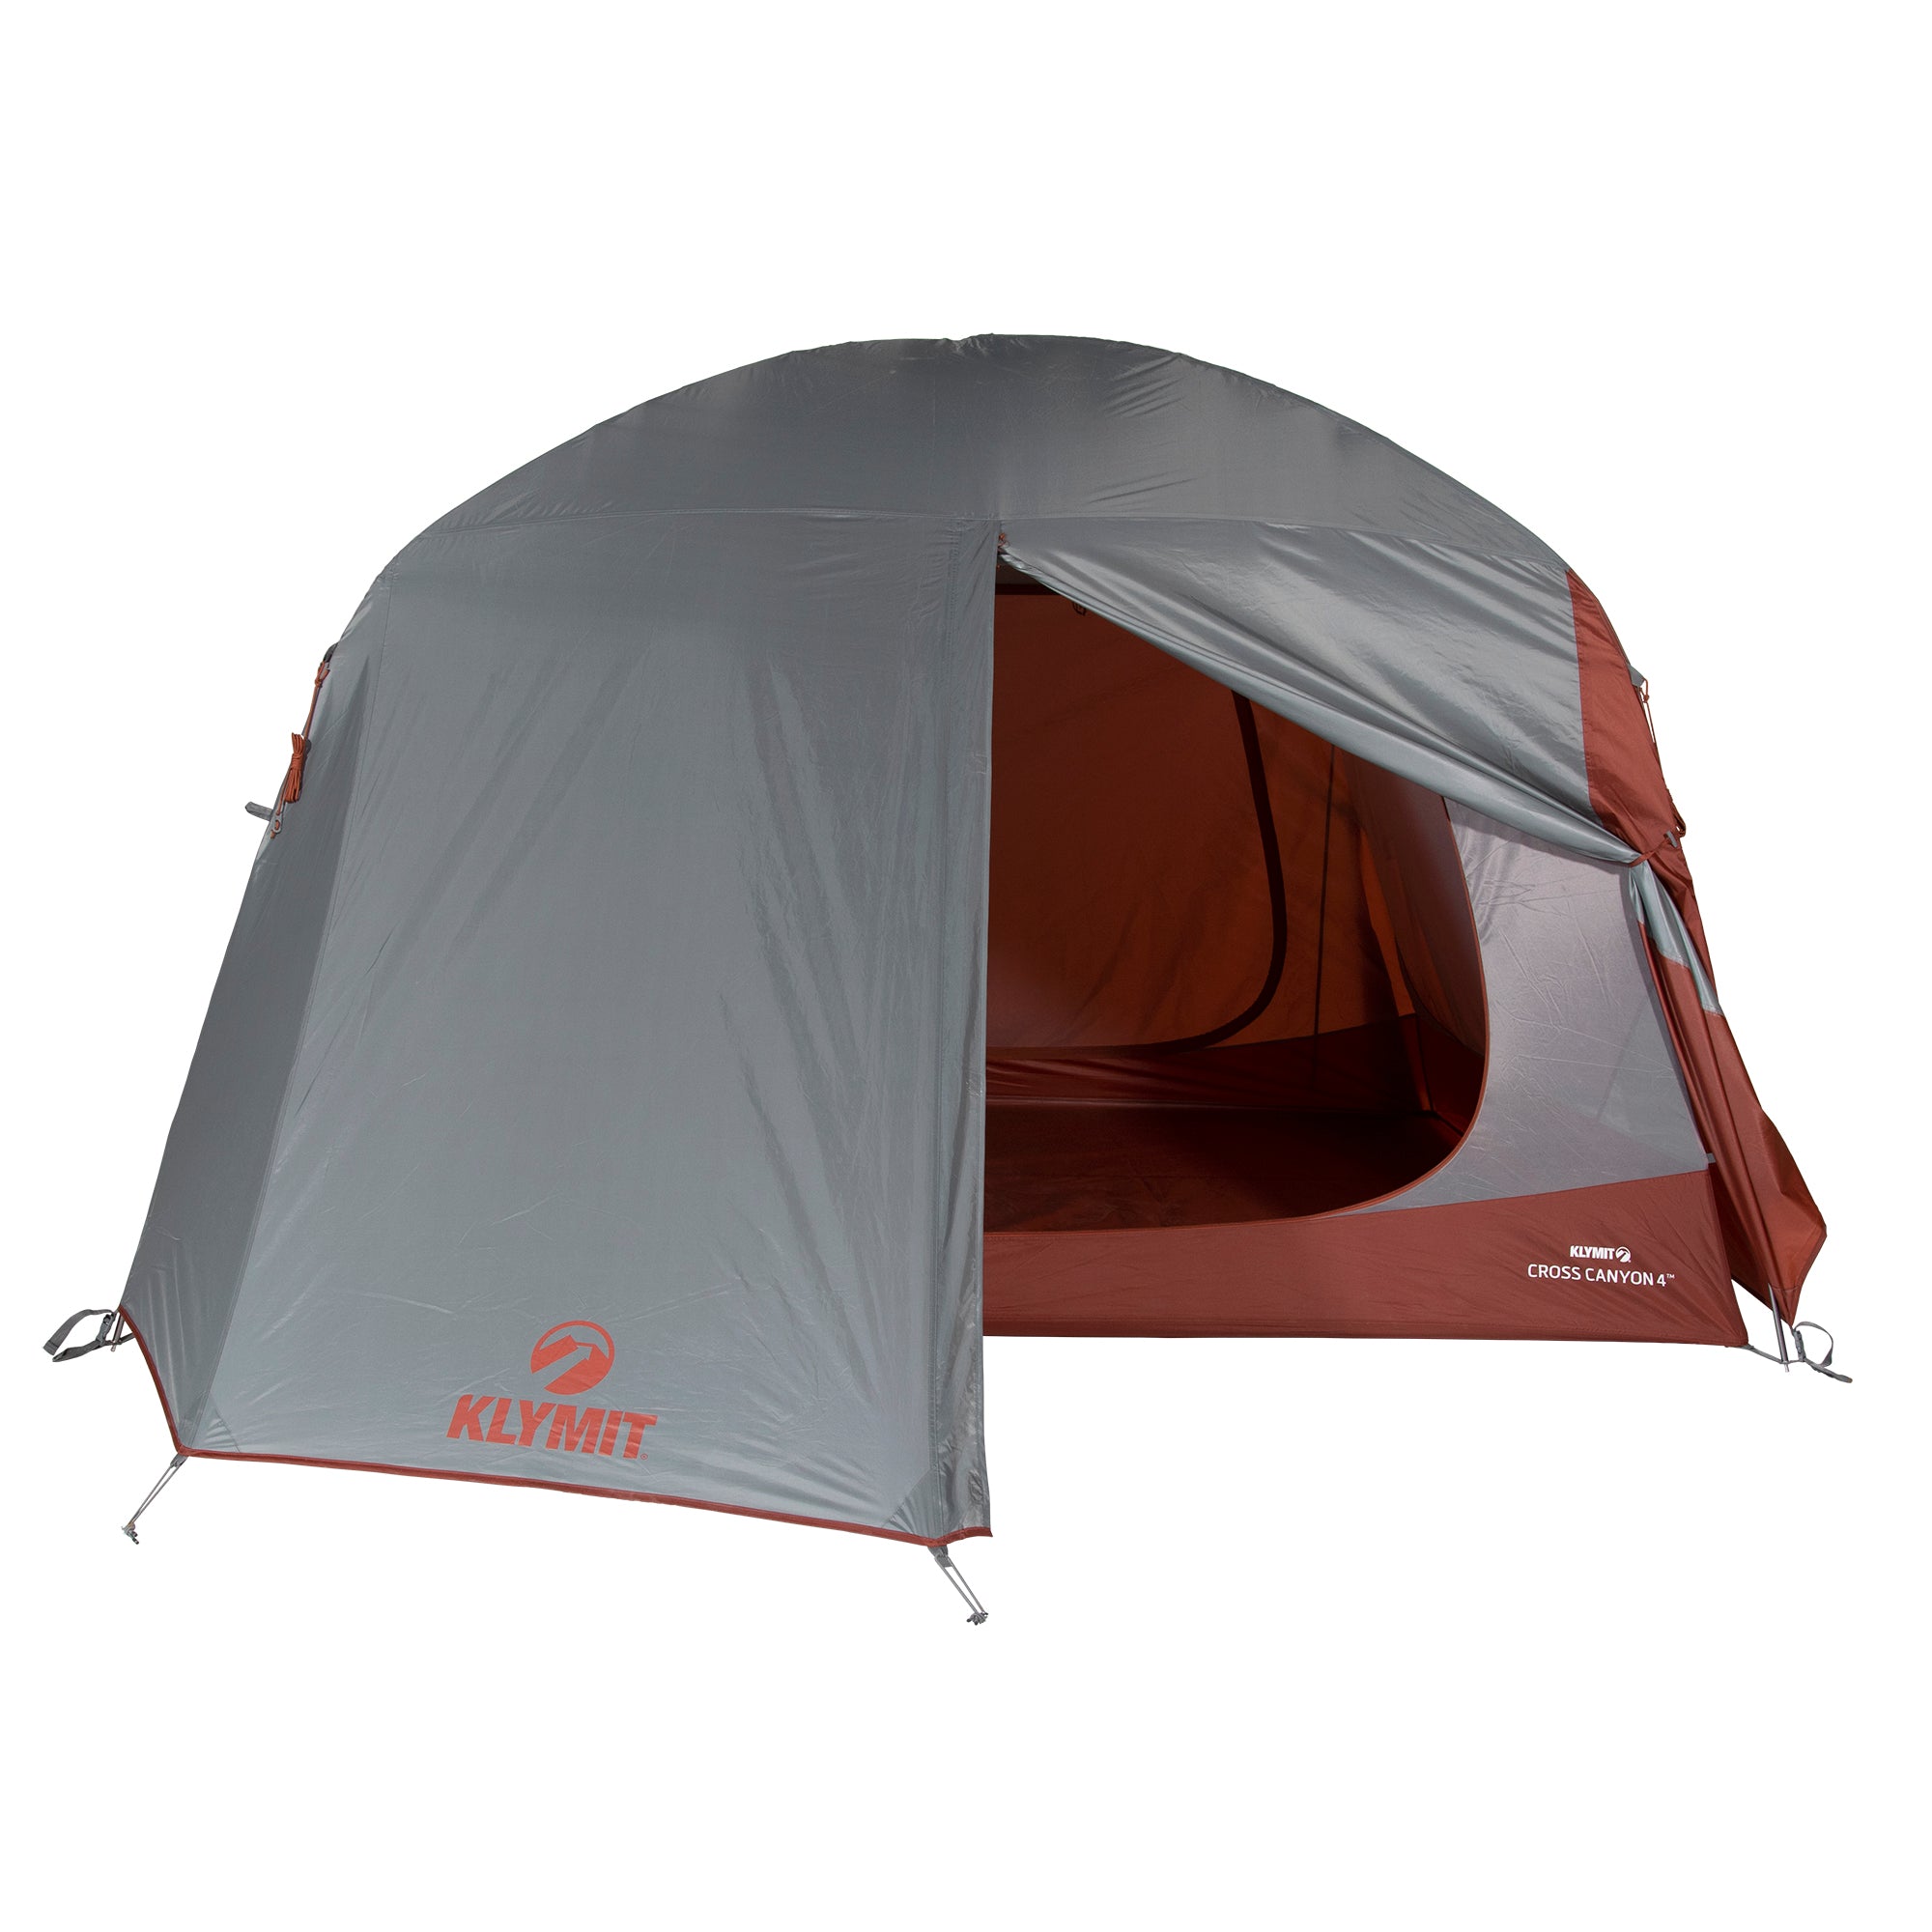 Cross Canyon Tent, Red and Gray, Open Fly Door